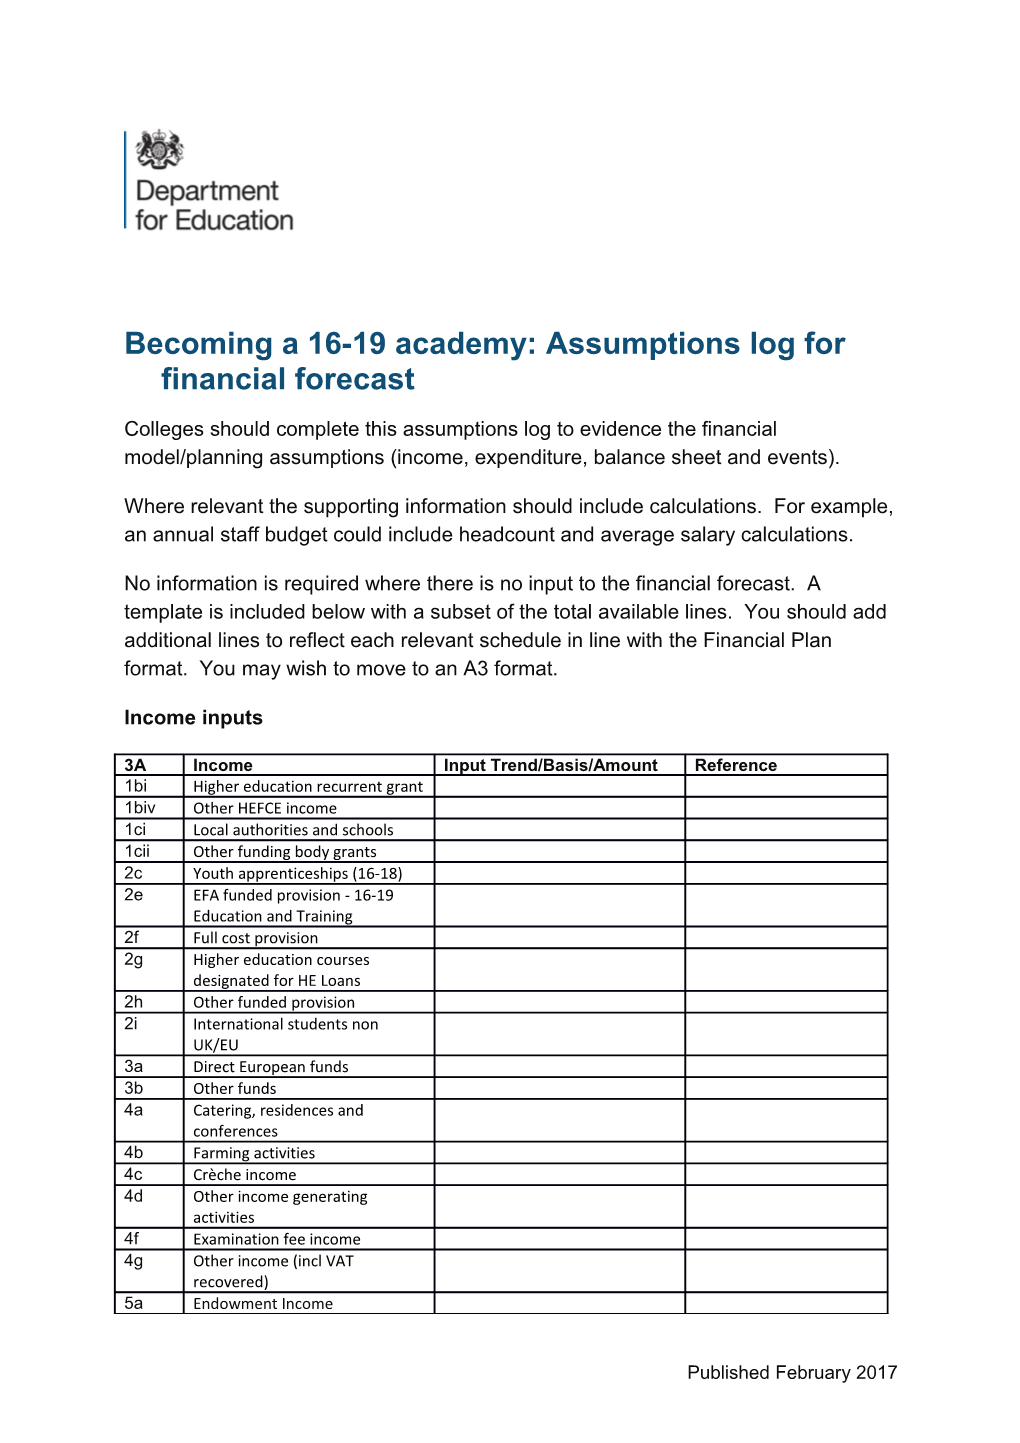 Becoming a 16-19 Academy: Assumptions Log for Financial Forecast